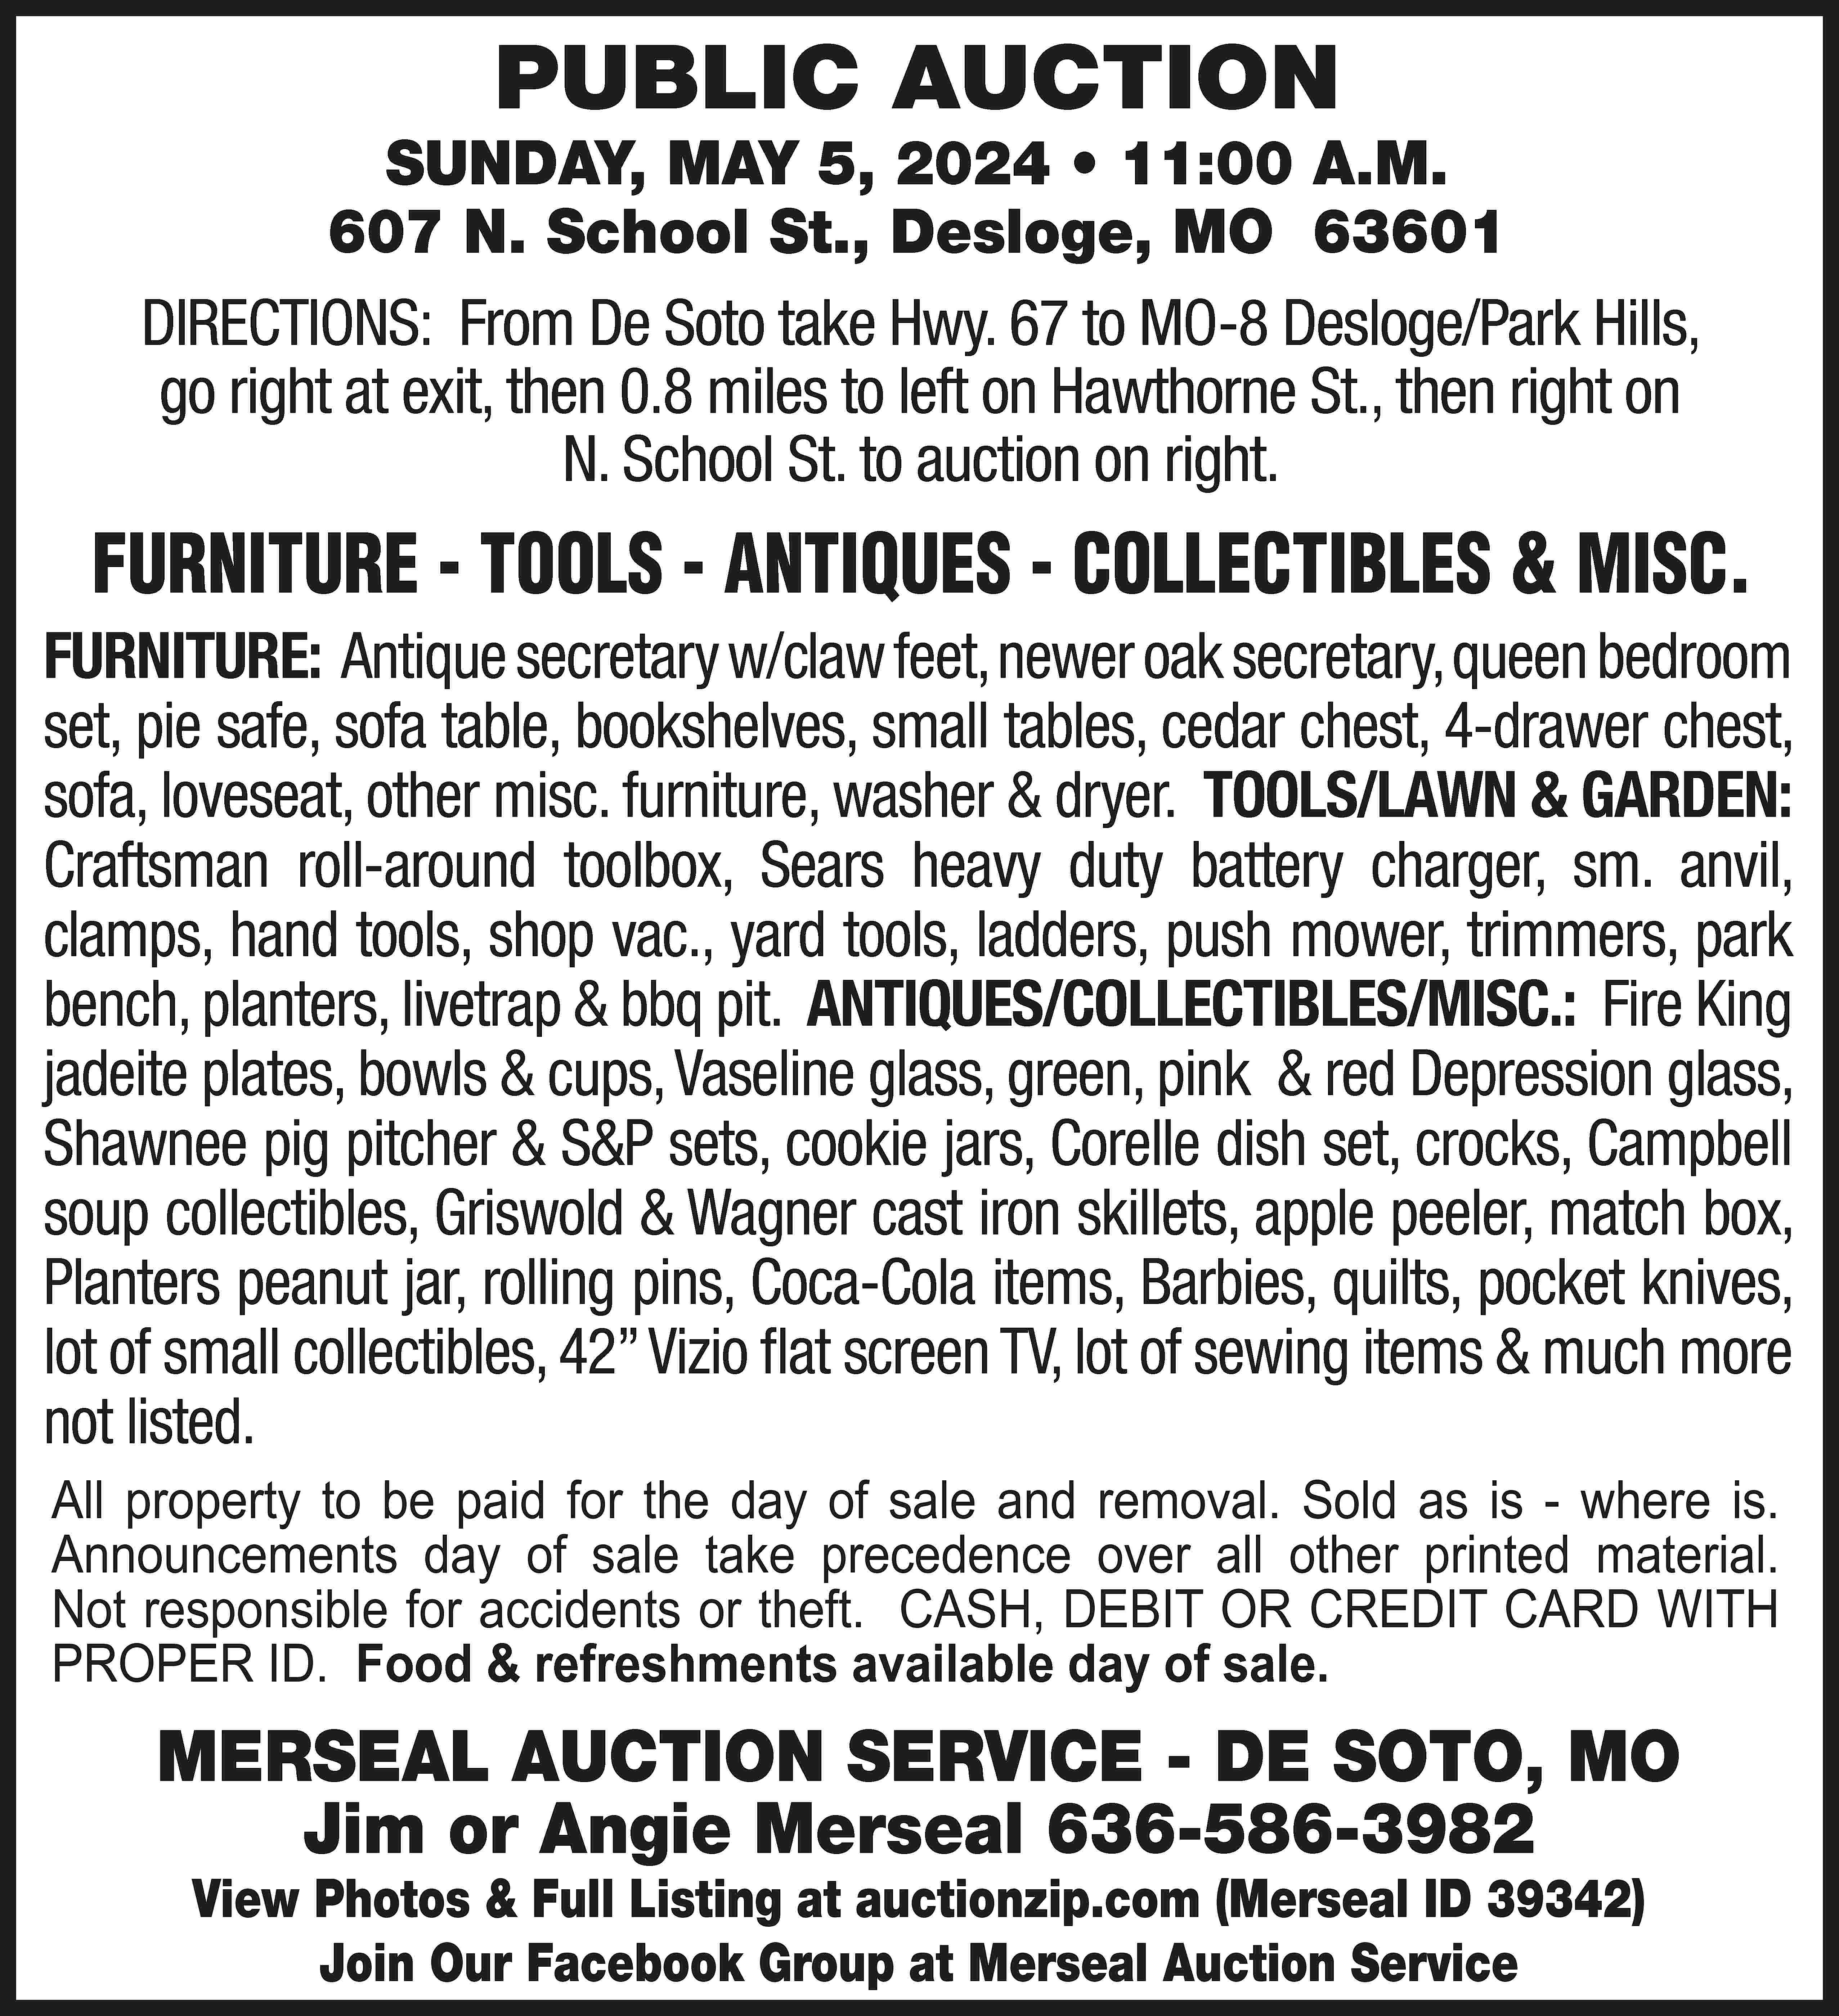 PUBLIC AUCTION SUNDAY, MAY 5,  PUBLIC AUCTION SUNDAY, MAY 5, 2024 • 11:00 A.M. 607 N. School St., Desloge, MO 63601 DIRECTIONS: From De Soto take Hwy. 67 to MO-8 Desloge/Park Hills, go right at exit, then 0.8 miles to left on Hawthorne St., then right on N. School St. to auction on right. FURNITURE - TOOLS - ANTIQUES - COLLECTIBLES & MISC. FURNITURE: Antique secretary w/claw feet, newer oak secretary, queen bedroom set, pie safe, sofa table, bookshelves, small tables, cedar chest, 4-drawer chest, sofa, loveseat, other misc. furniture, washer & dryer. TOOLS/LAWN & GARDEN: Craftsman roll-around toolbox, Sears heavy duty battery charger, sm. anvil, clamps, hand tools, shop vac., yard tools, ladders, push mower, trimmers, park bench, planters, livetrap & bbq pit. ANTIQUES/COLLECTIBLES/MISC.: Fire King jadeite plates, bowls & cups, Vaseline glass, green, pink & red Depression glass, Shawnee pig pitcher & S&P sets, cookie jars, Corelle dish set, crocks, Campbell soup collectibles, Griswold & Wagner cast iron skillets, apple peeler, match box, Planters peanut jar, rolling pins, Coca-Cola items, Barbies, quilts, pocket knives, lot of small collectibles, 42” Vizio flat screen TV, lot of sewing items & much more not listed. All property to be paid for the day of sale and removal. Sold as is - where is. Announcements day of sale take precedence over all other printed material. Not responsible for accidents or theft. CASH, DEBIT OR CREDIT CARD WITH PROPER ID. Food & refreshments available day of sale. MERSEAL AUCTION SERVICE - DE SOTO, MO Jim or Angie Merseal 636-586-3982 View Photos & Full Listing at auctionzip.com (Merseal ID 39342) Join Our Facebook Group at Merseal Auction Service